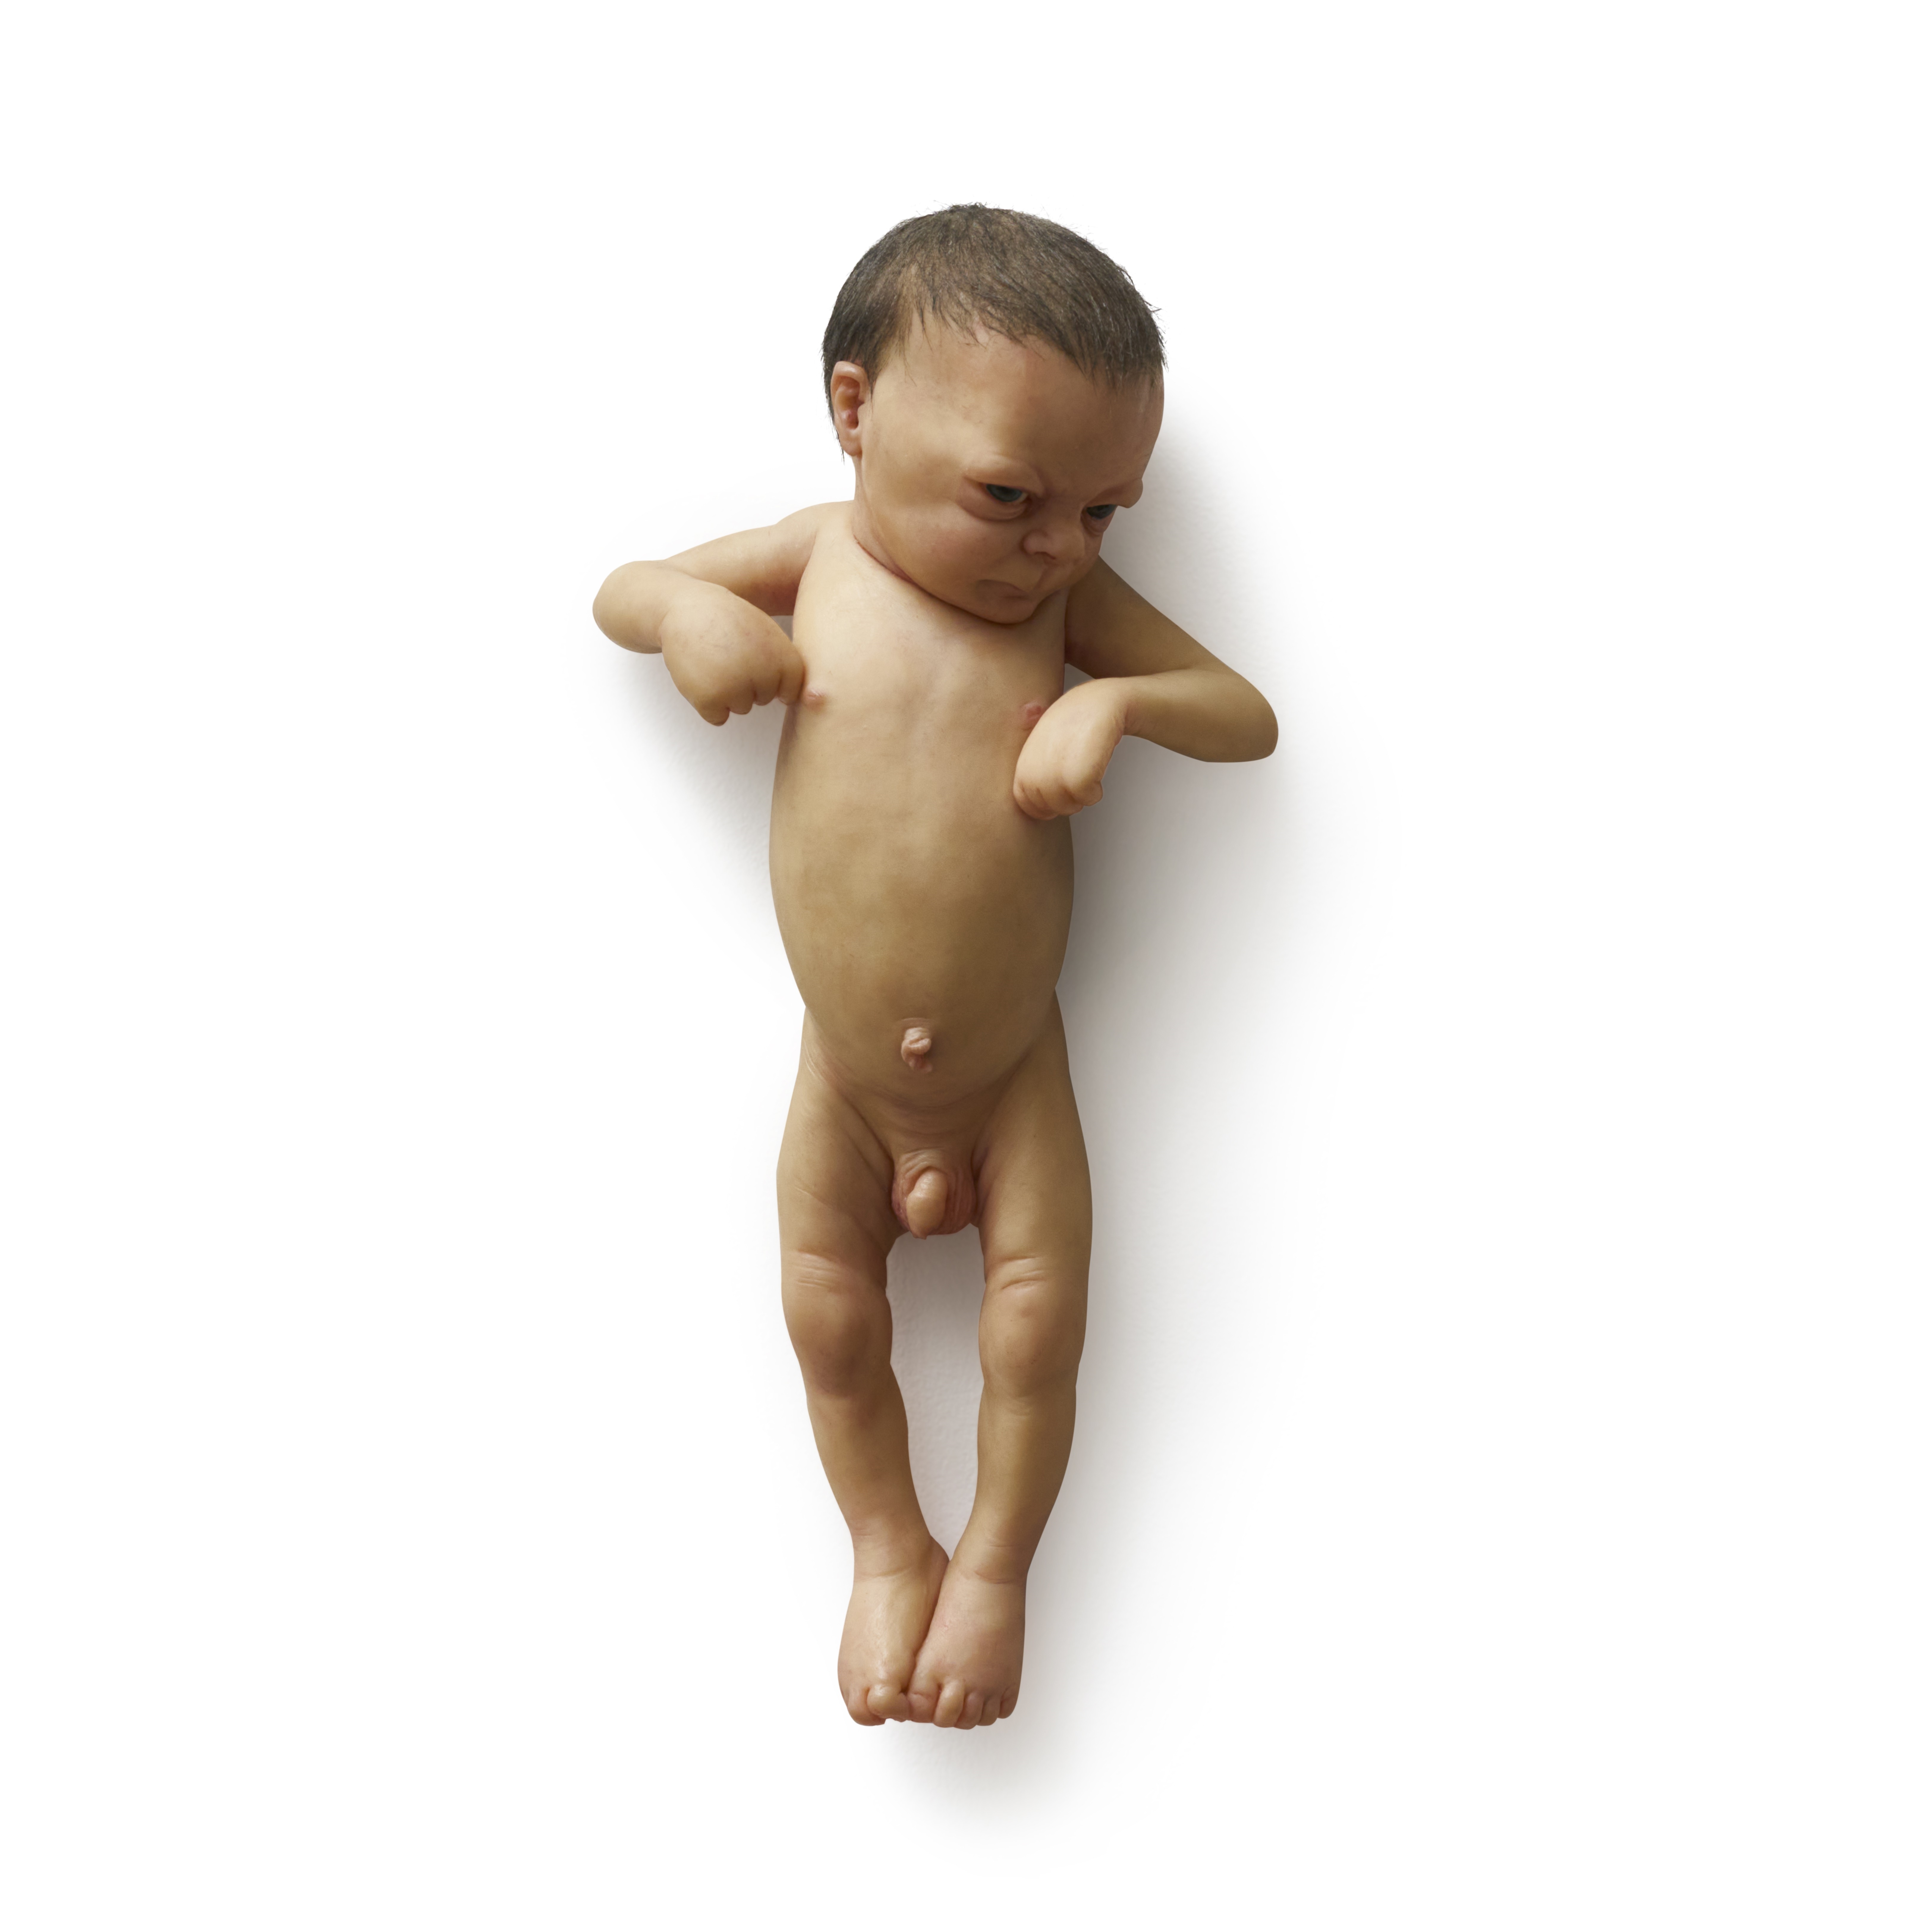 Untitled (Baby) by Ron Mueck, Executed in 2000